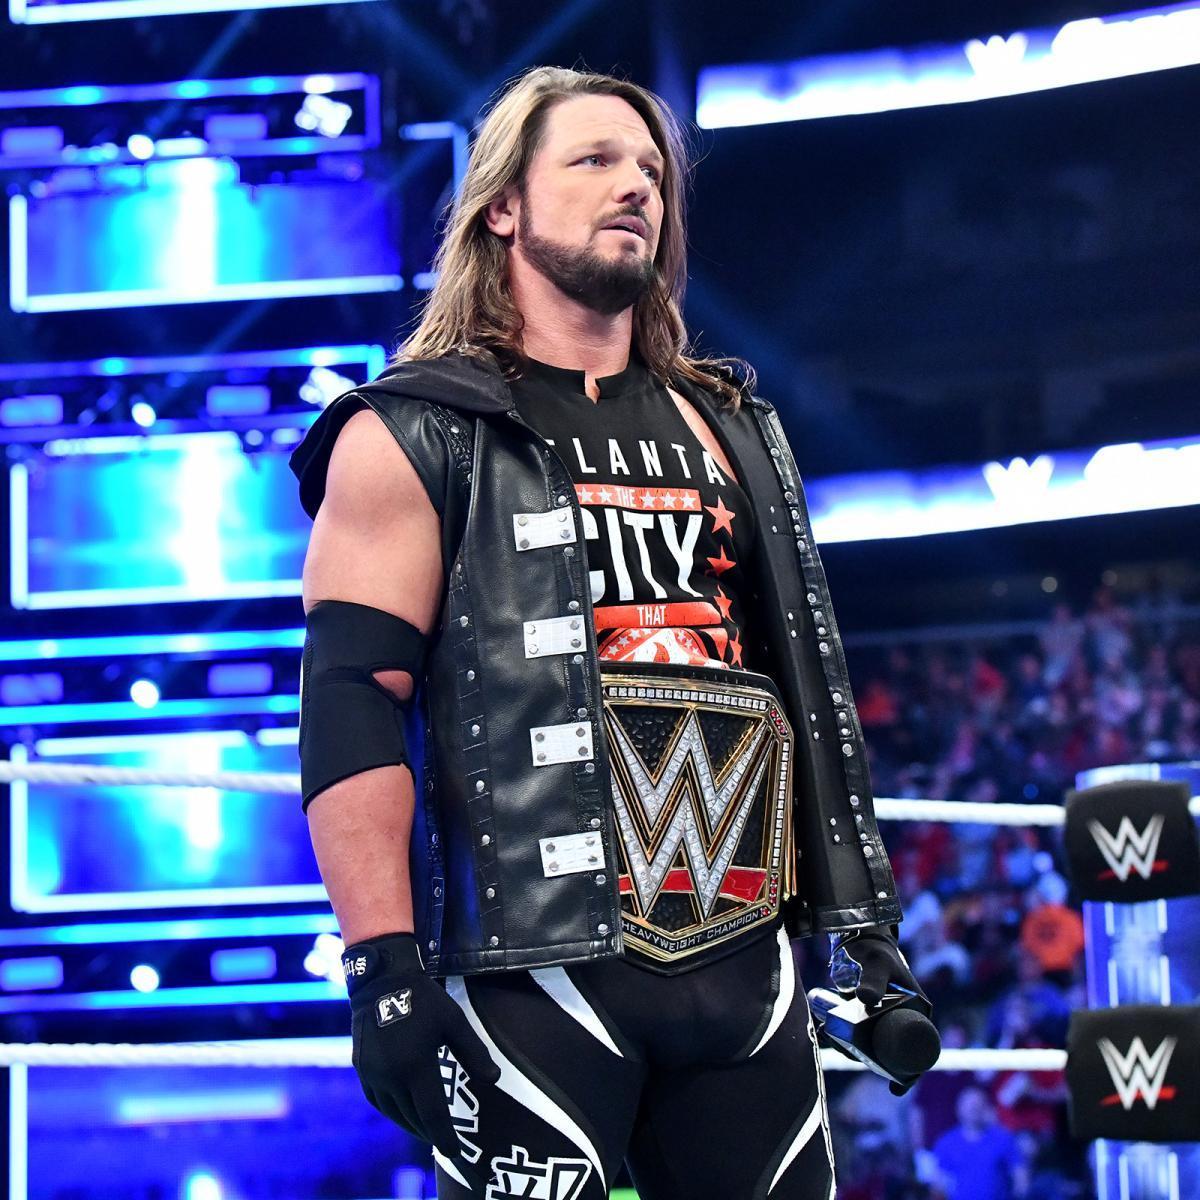 WWE star AJ Styles 'set to fight Randy Orton at WrestleMania' and fans love it